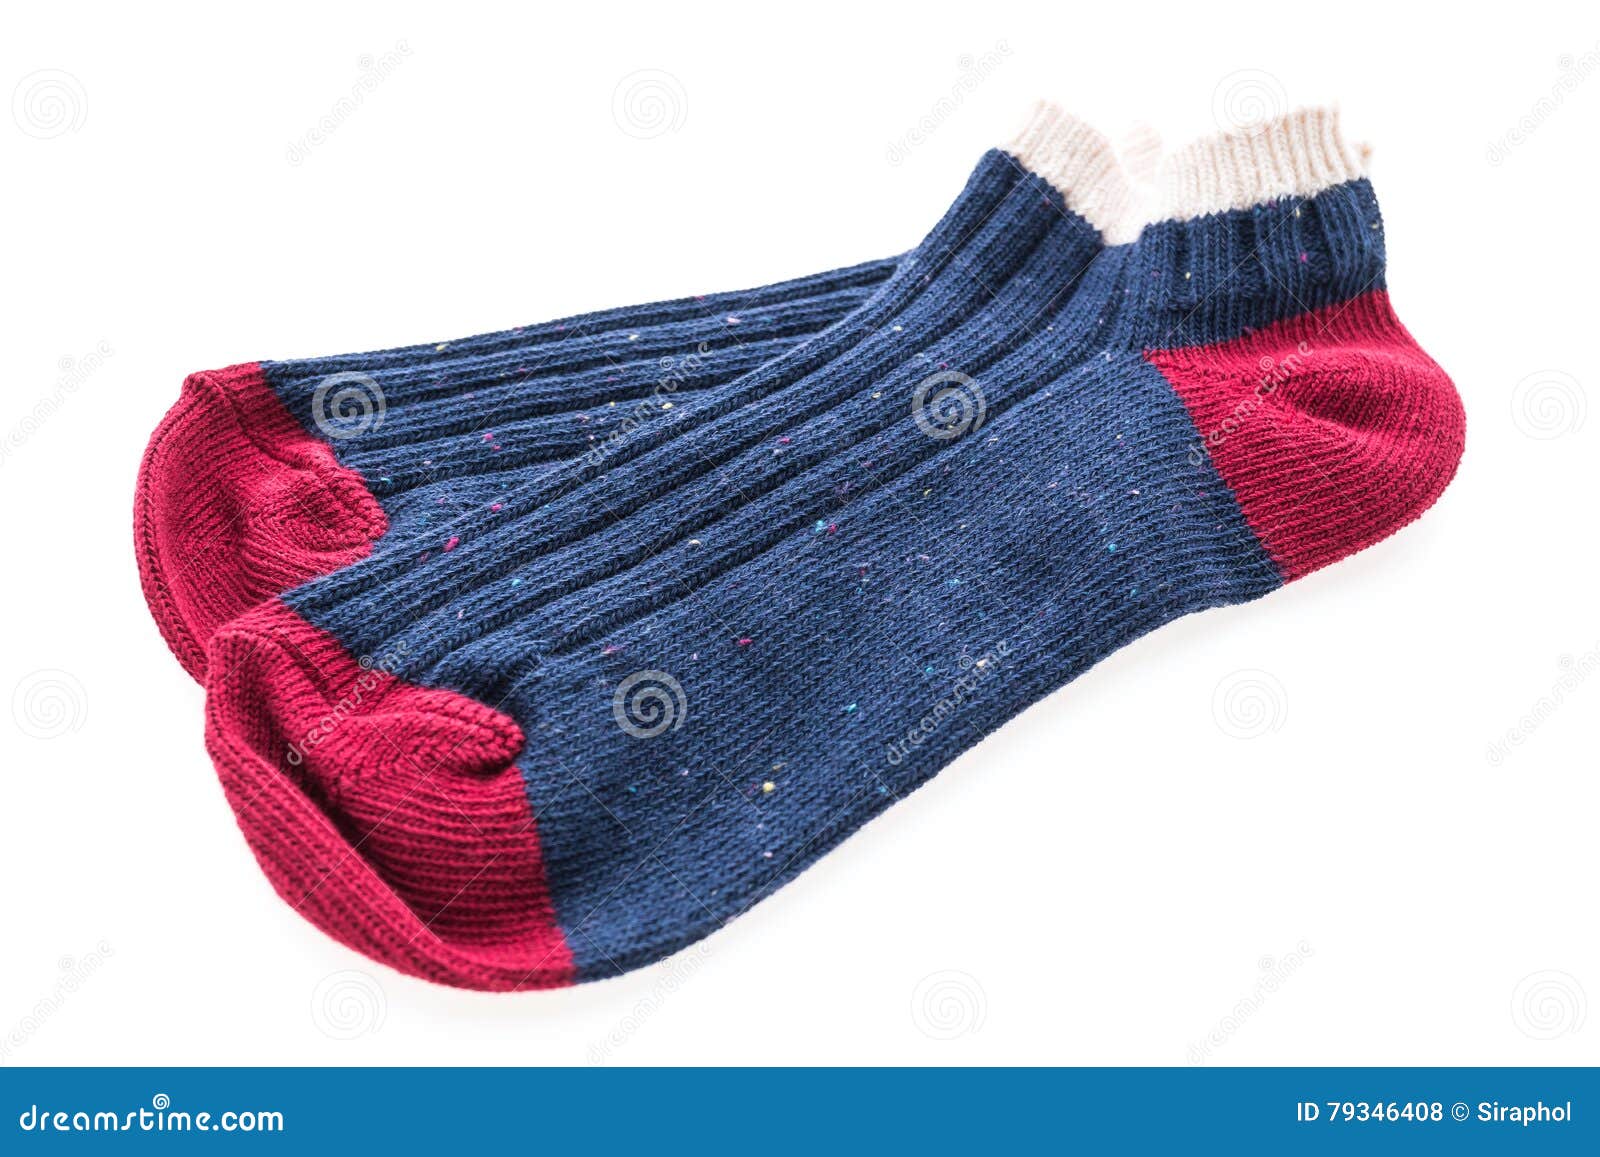 Pair of sock stock photo. Image of clothes, gray, pair - 79346408